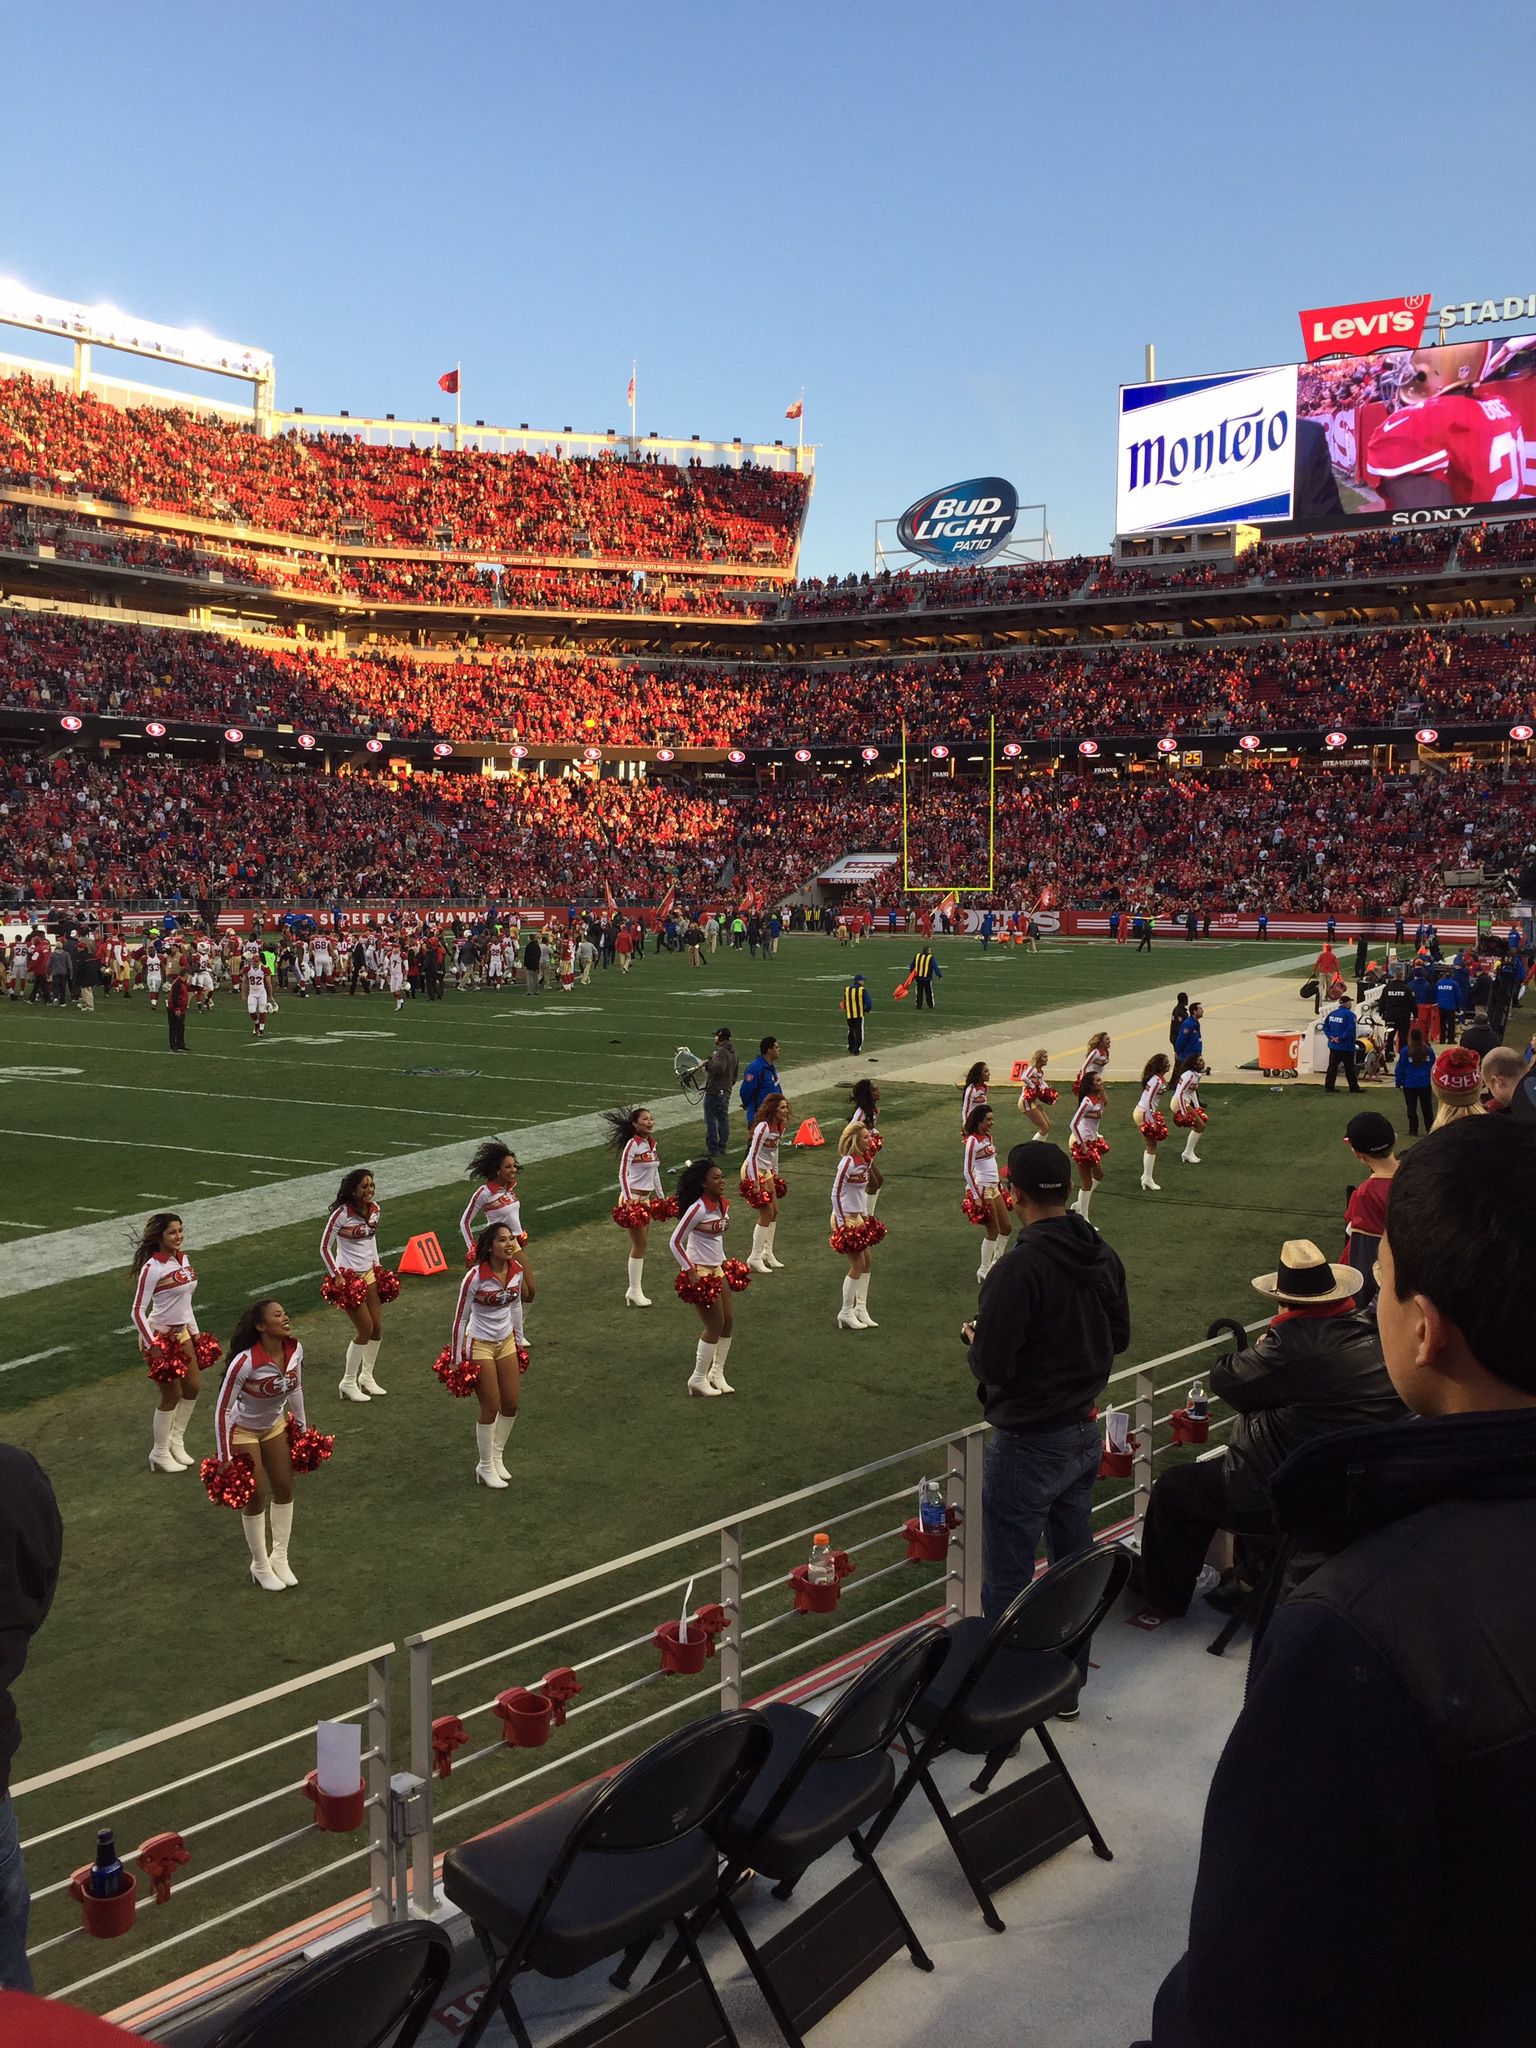 Two Amazing Seats Sf 49ers Vs Az Cardinals Lower Level 2nd Row!